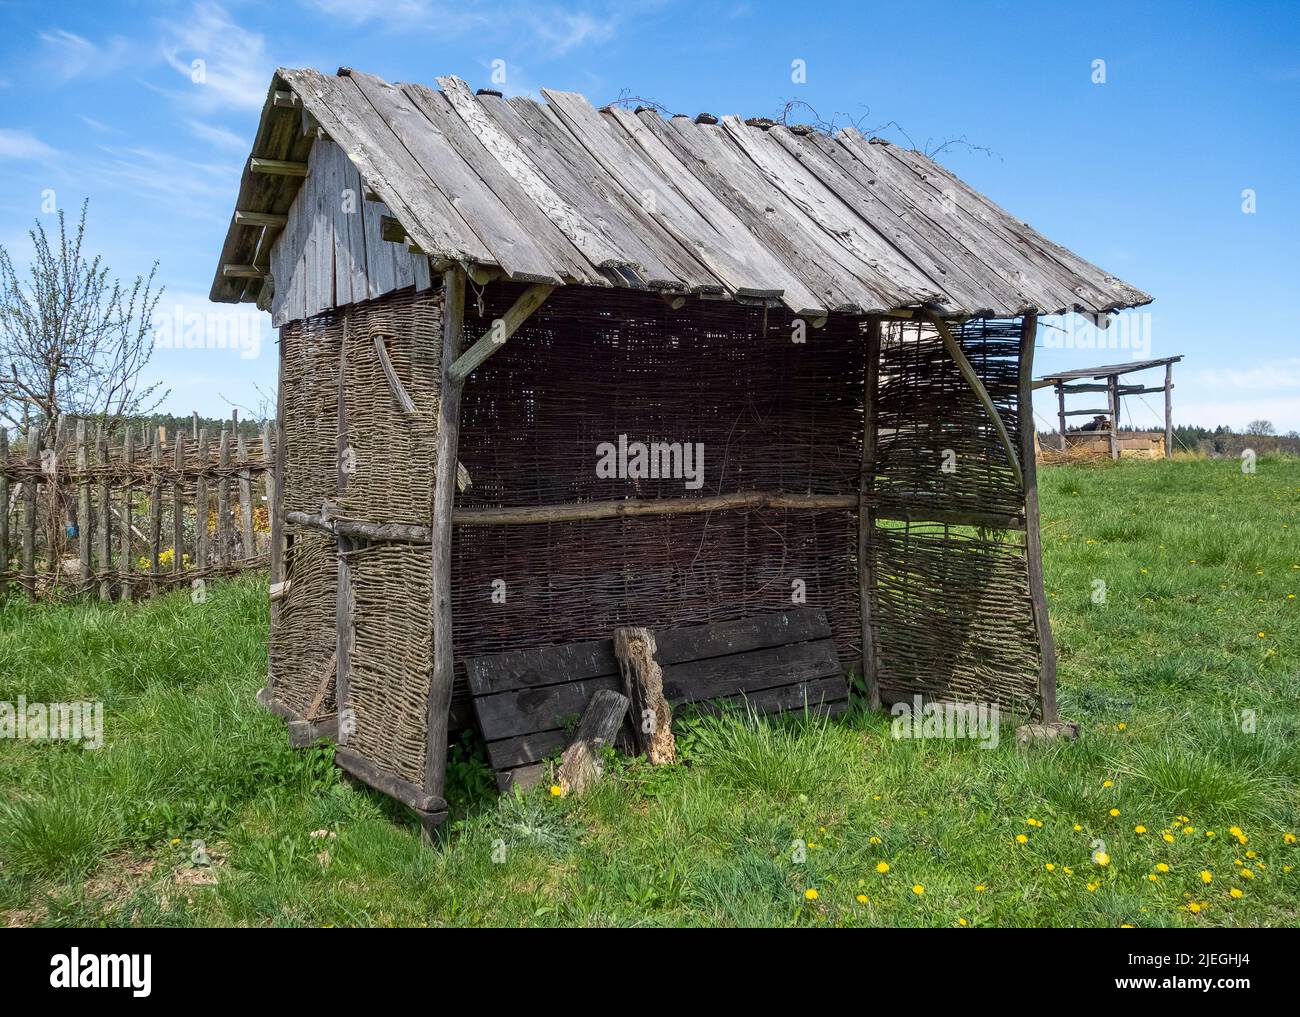 Medieval hut in sunny ambiance at early spring time Stock Photo